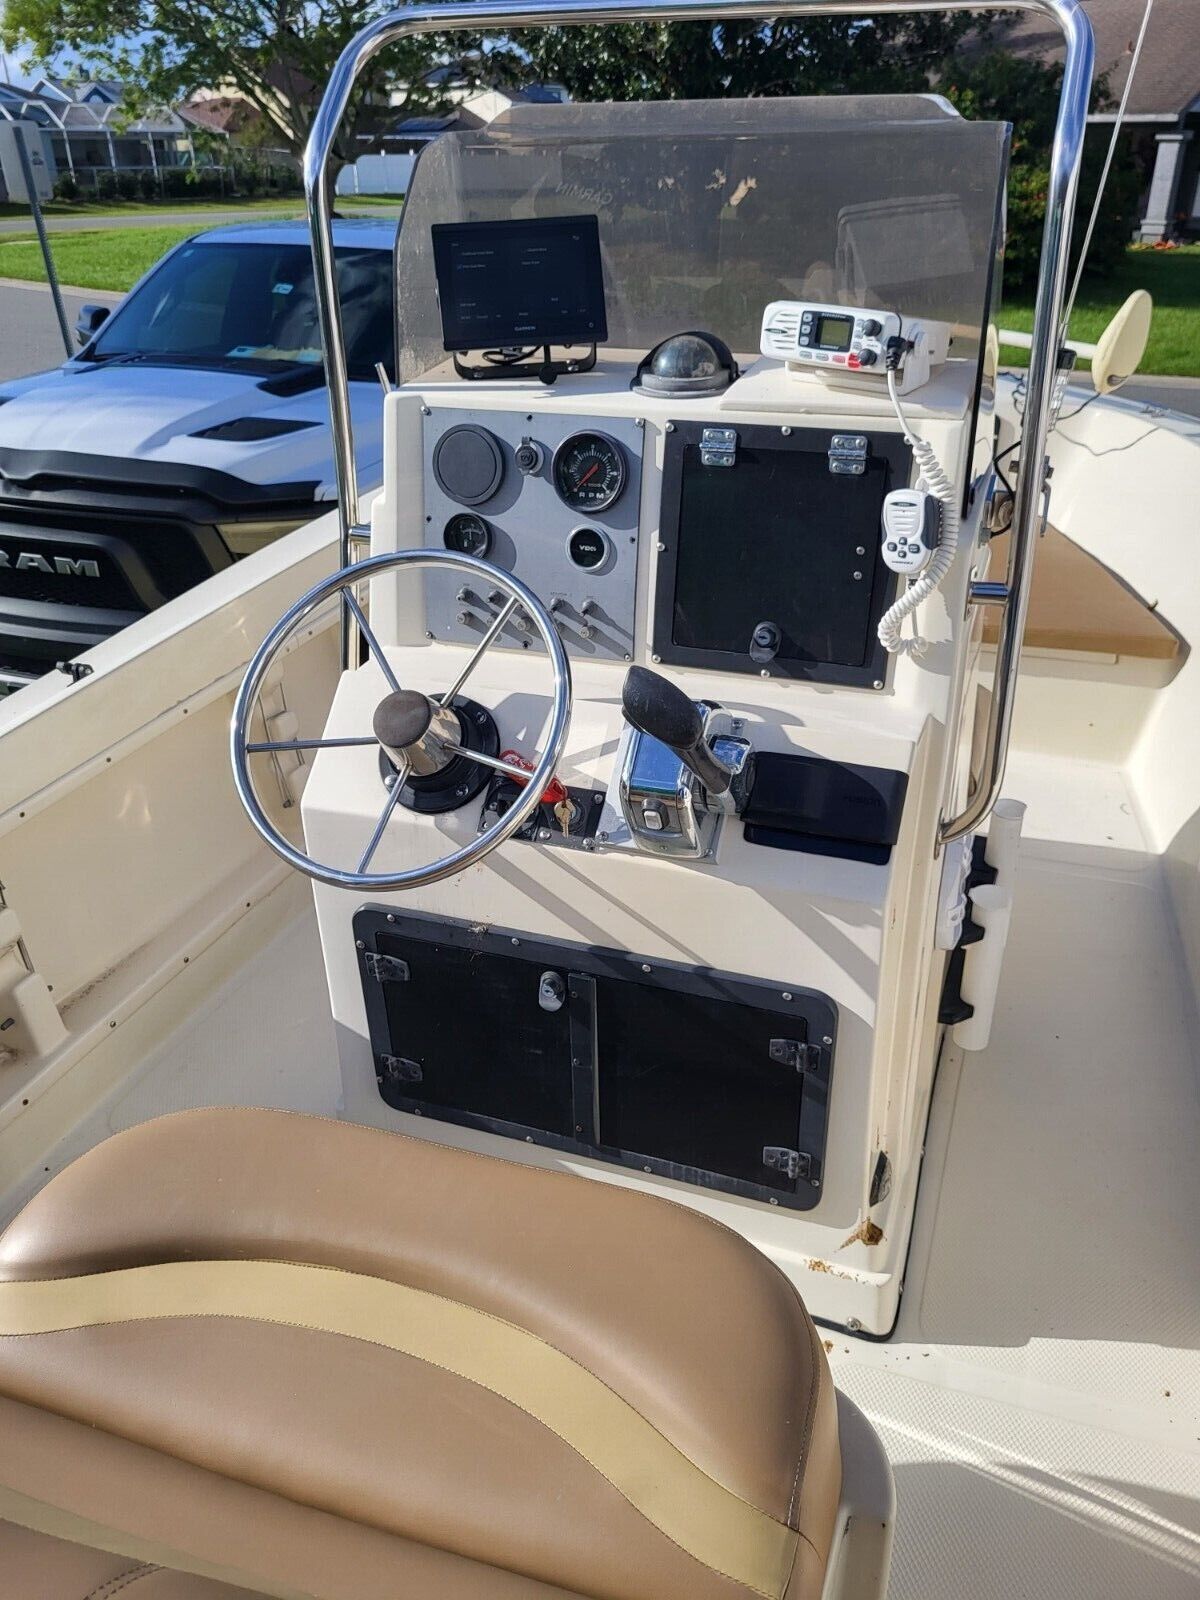 Ft Keywest Boat Center Console Fishing Boat For Sale For Boats From Usa Com